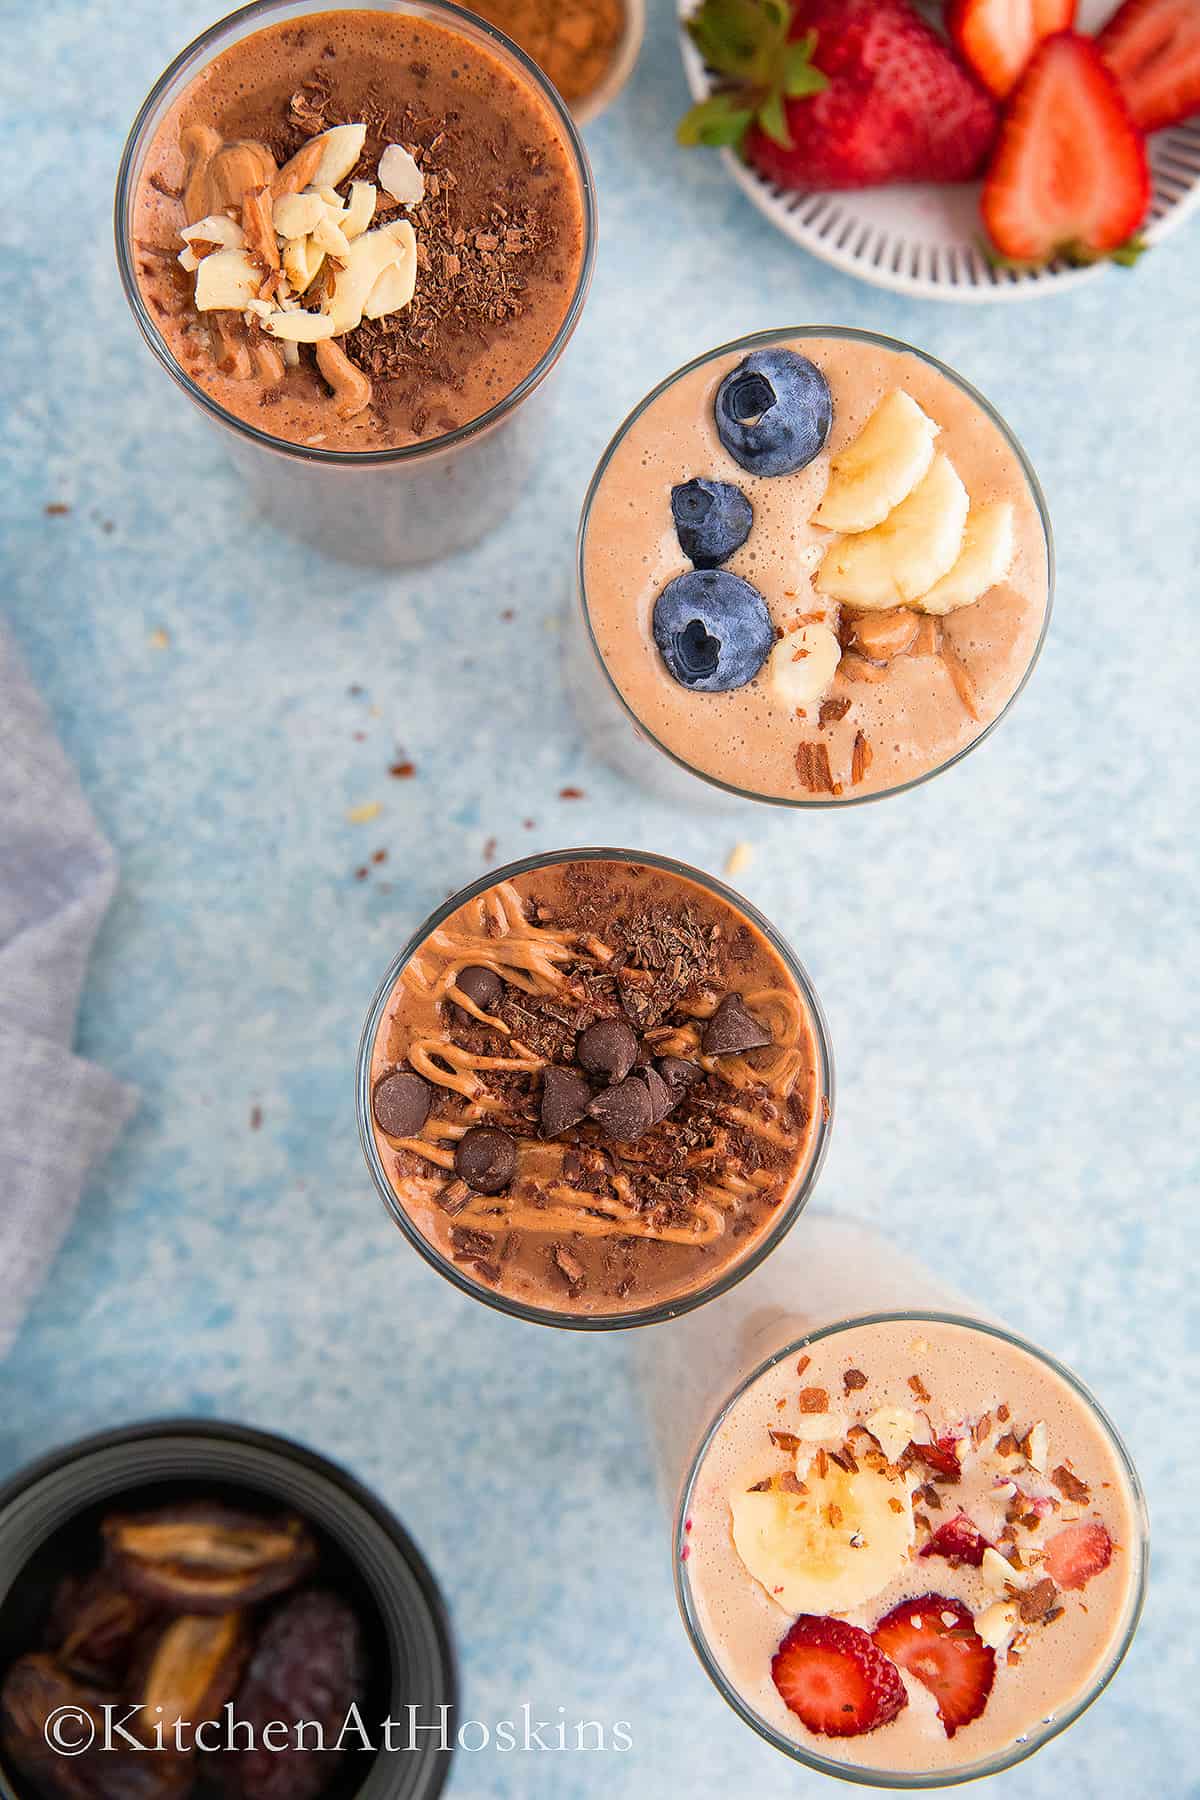 4 glasses filled with peanut butter smoothies.